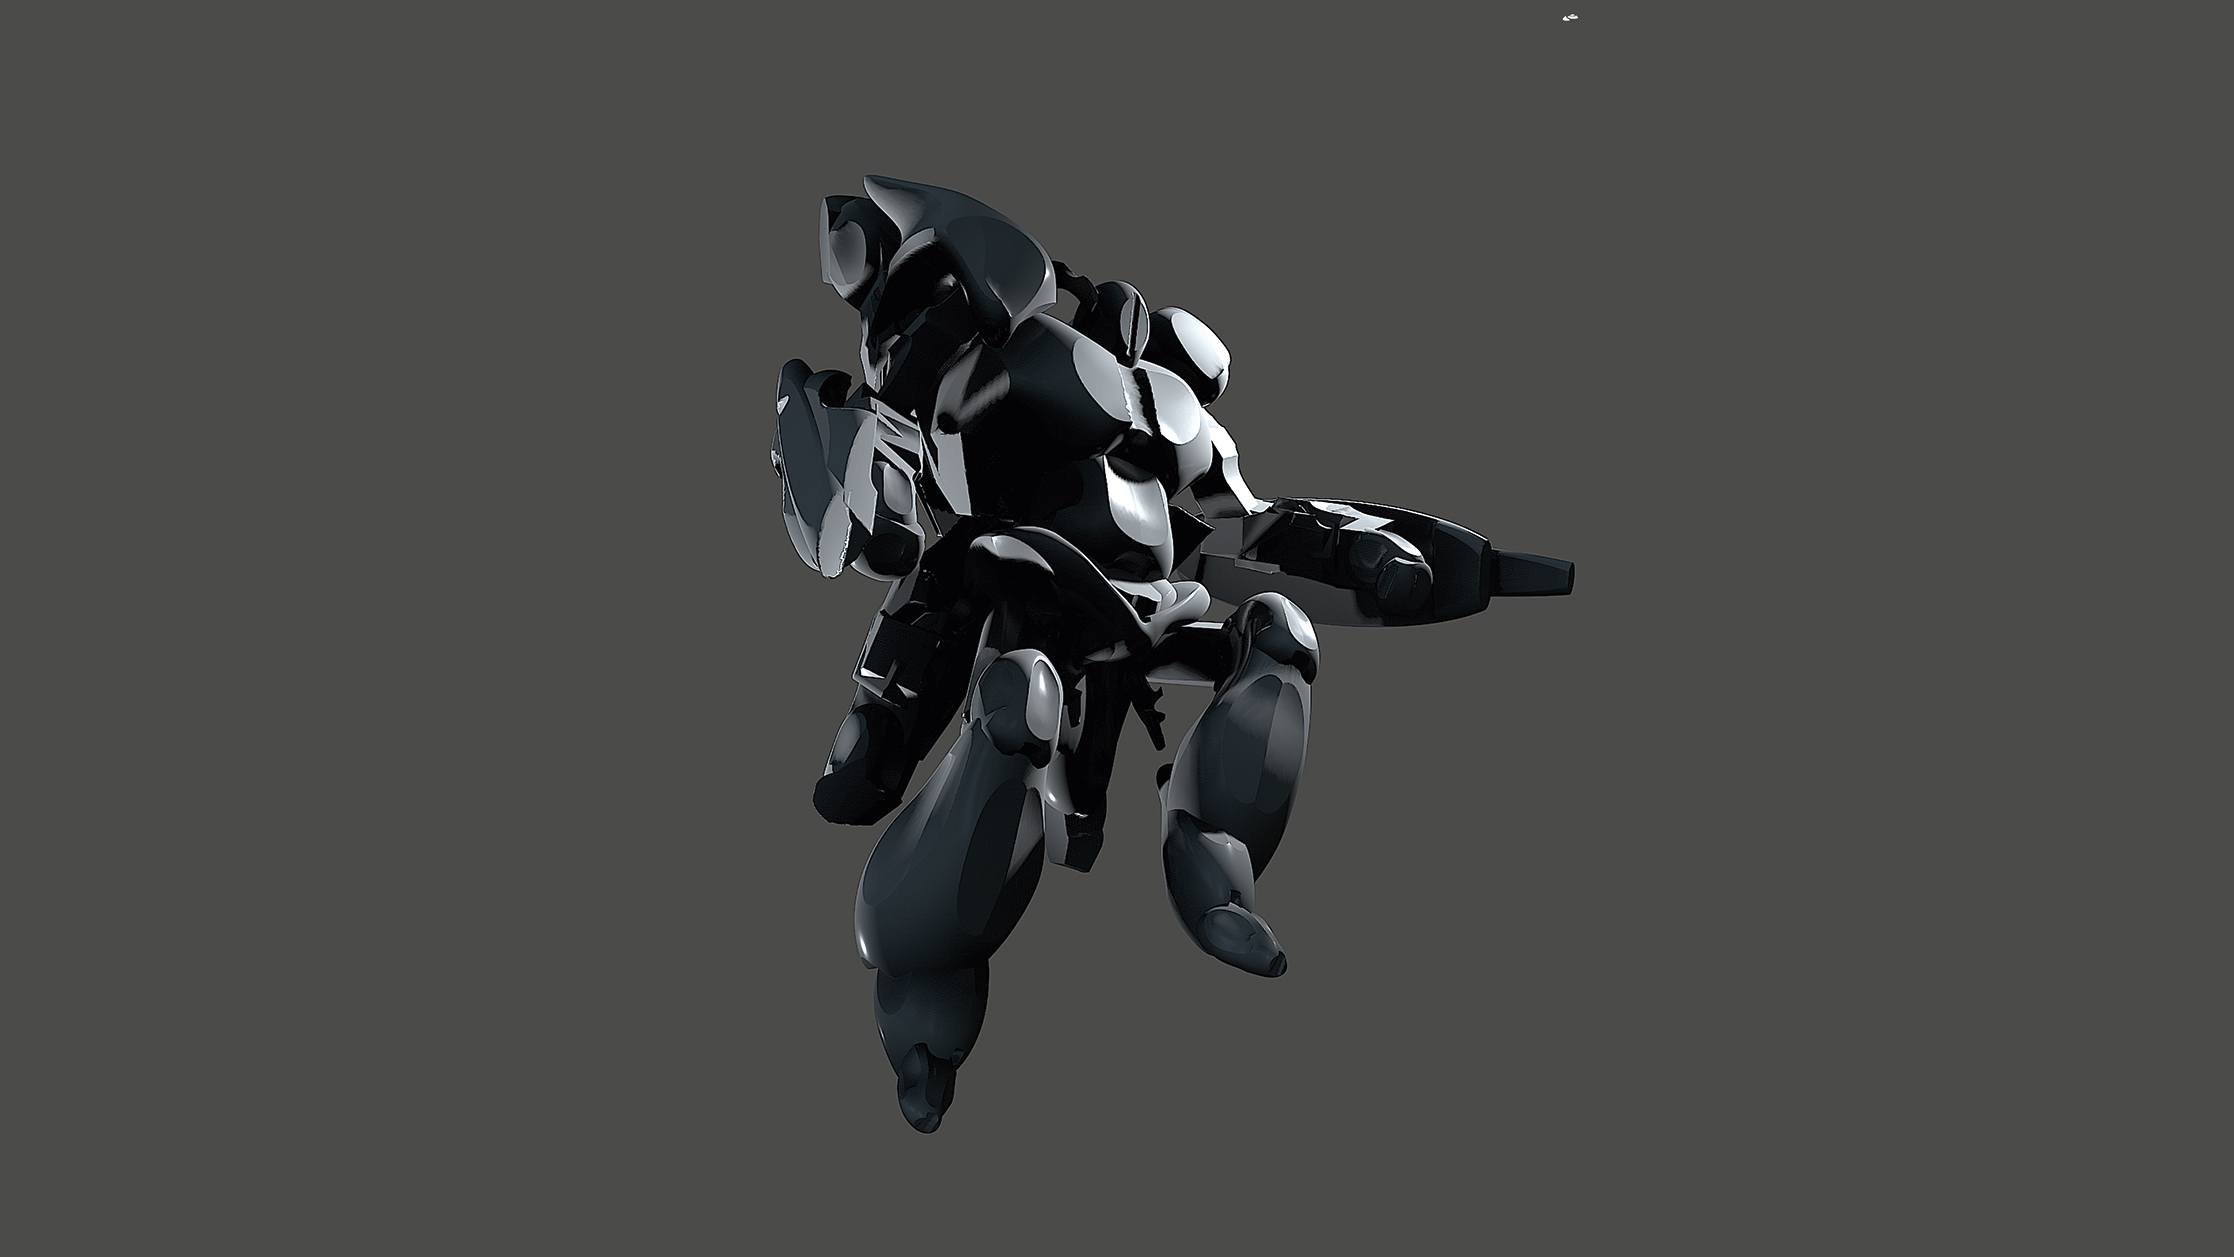 3D model of mech character in Nomad Sculpt by Glen Southern